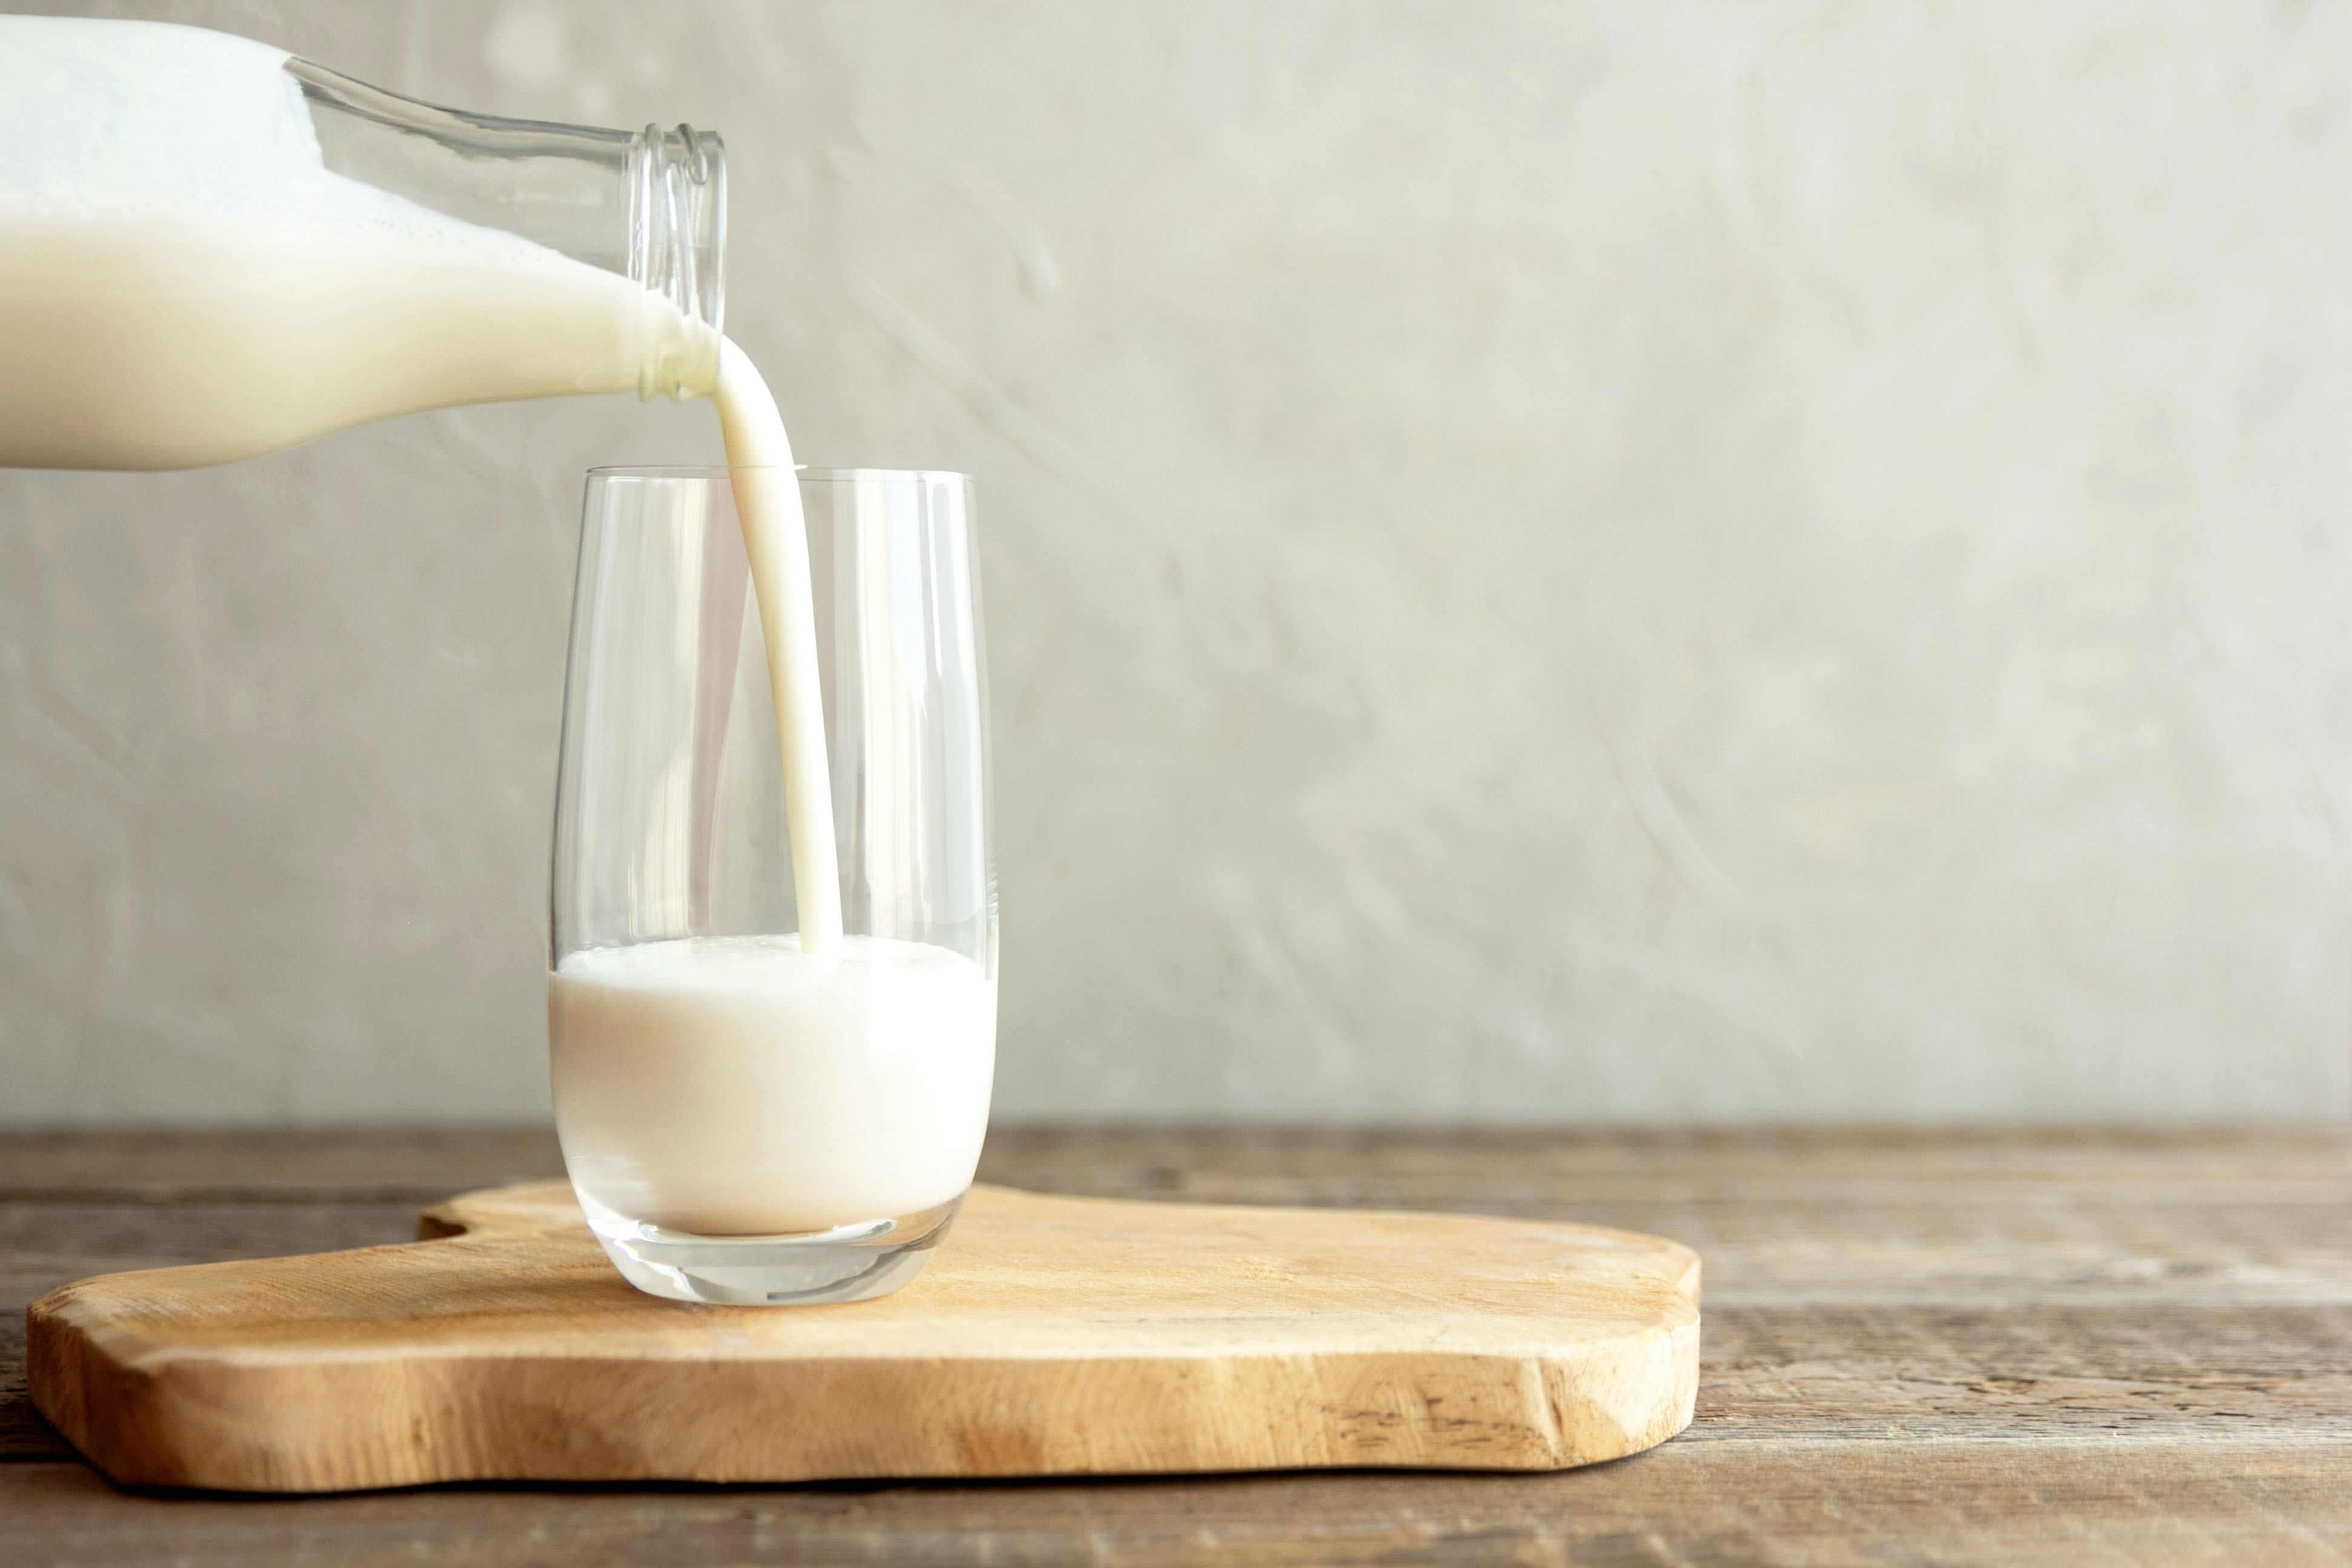 Low-fat milk provides you with the required protein without the added fat